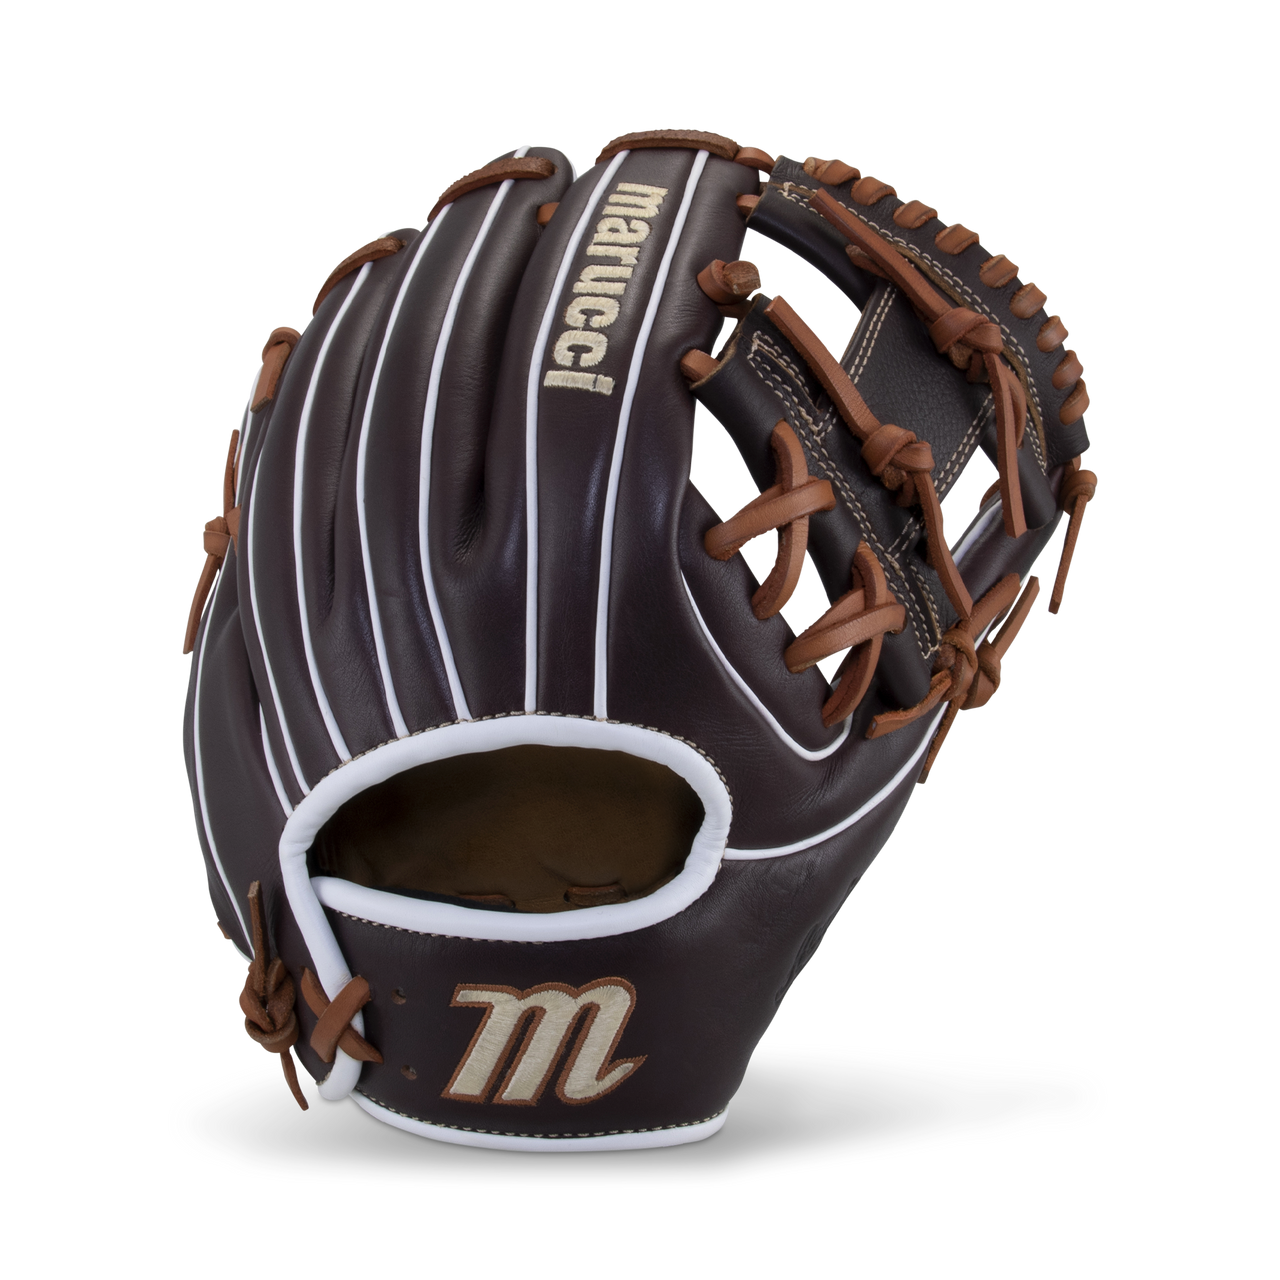 marucci-krewe-m-type-baseball-glove-42a2-11-25-inch-i-web-right-hand-throw MFGKR42A2-BRTN-RightHandThrow Marucci  <h1 class=productView-title-lower>Marucci KREWE M TYPE 42A2 11.25 I-WEB</h1> <p><em>M Type</em> fit system